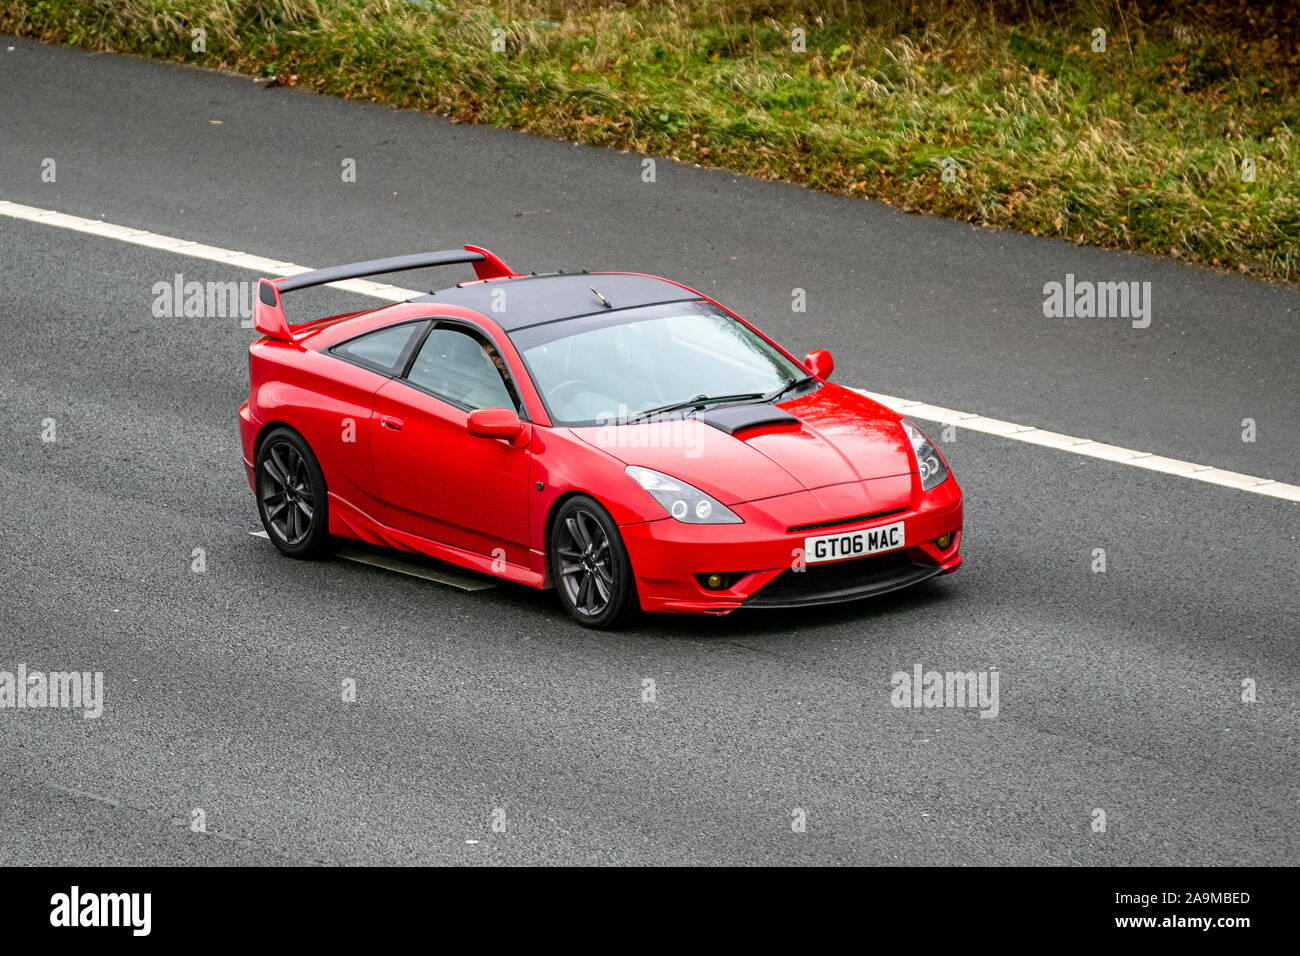 2006 red Toyota Celica Vvtl-I GT; UK Vehicular traffic, transport, modern vehicles, saloon cars, south-bound on the 3 lane M61 motorway highway. Stock Photo